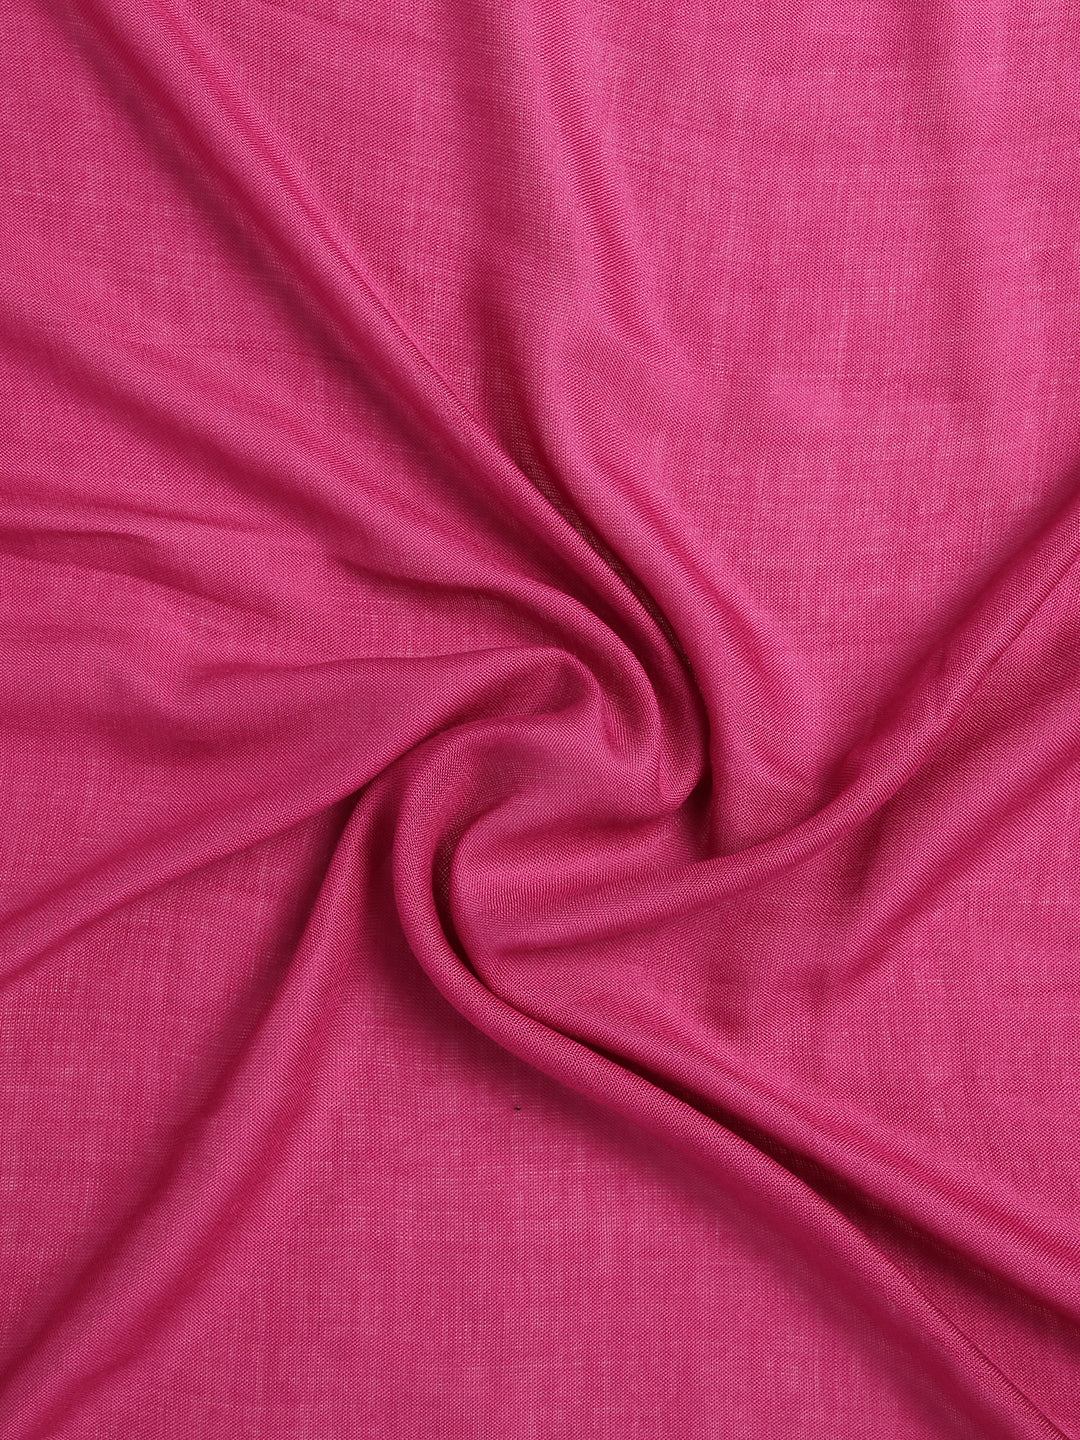 Magenta Rayon Solid Unisex Stole